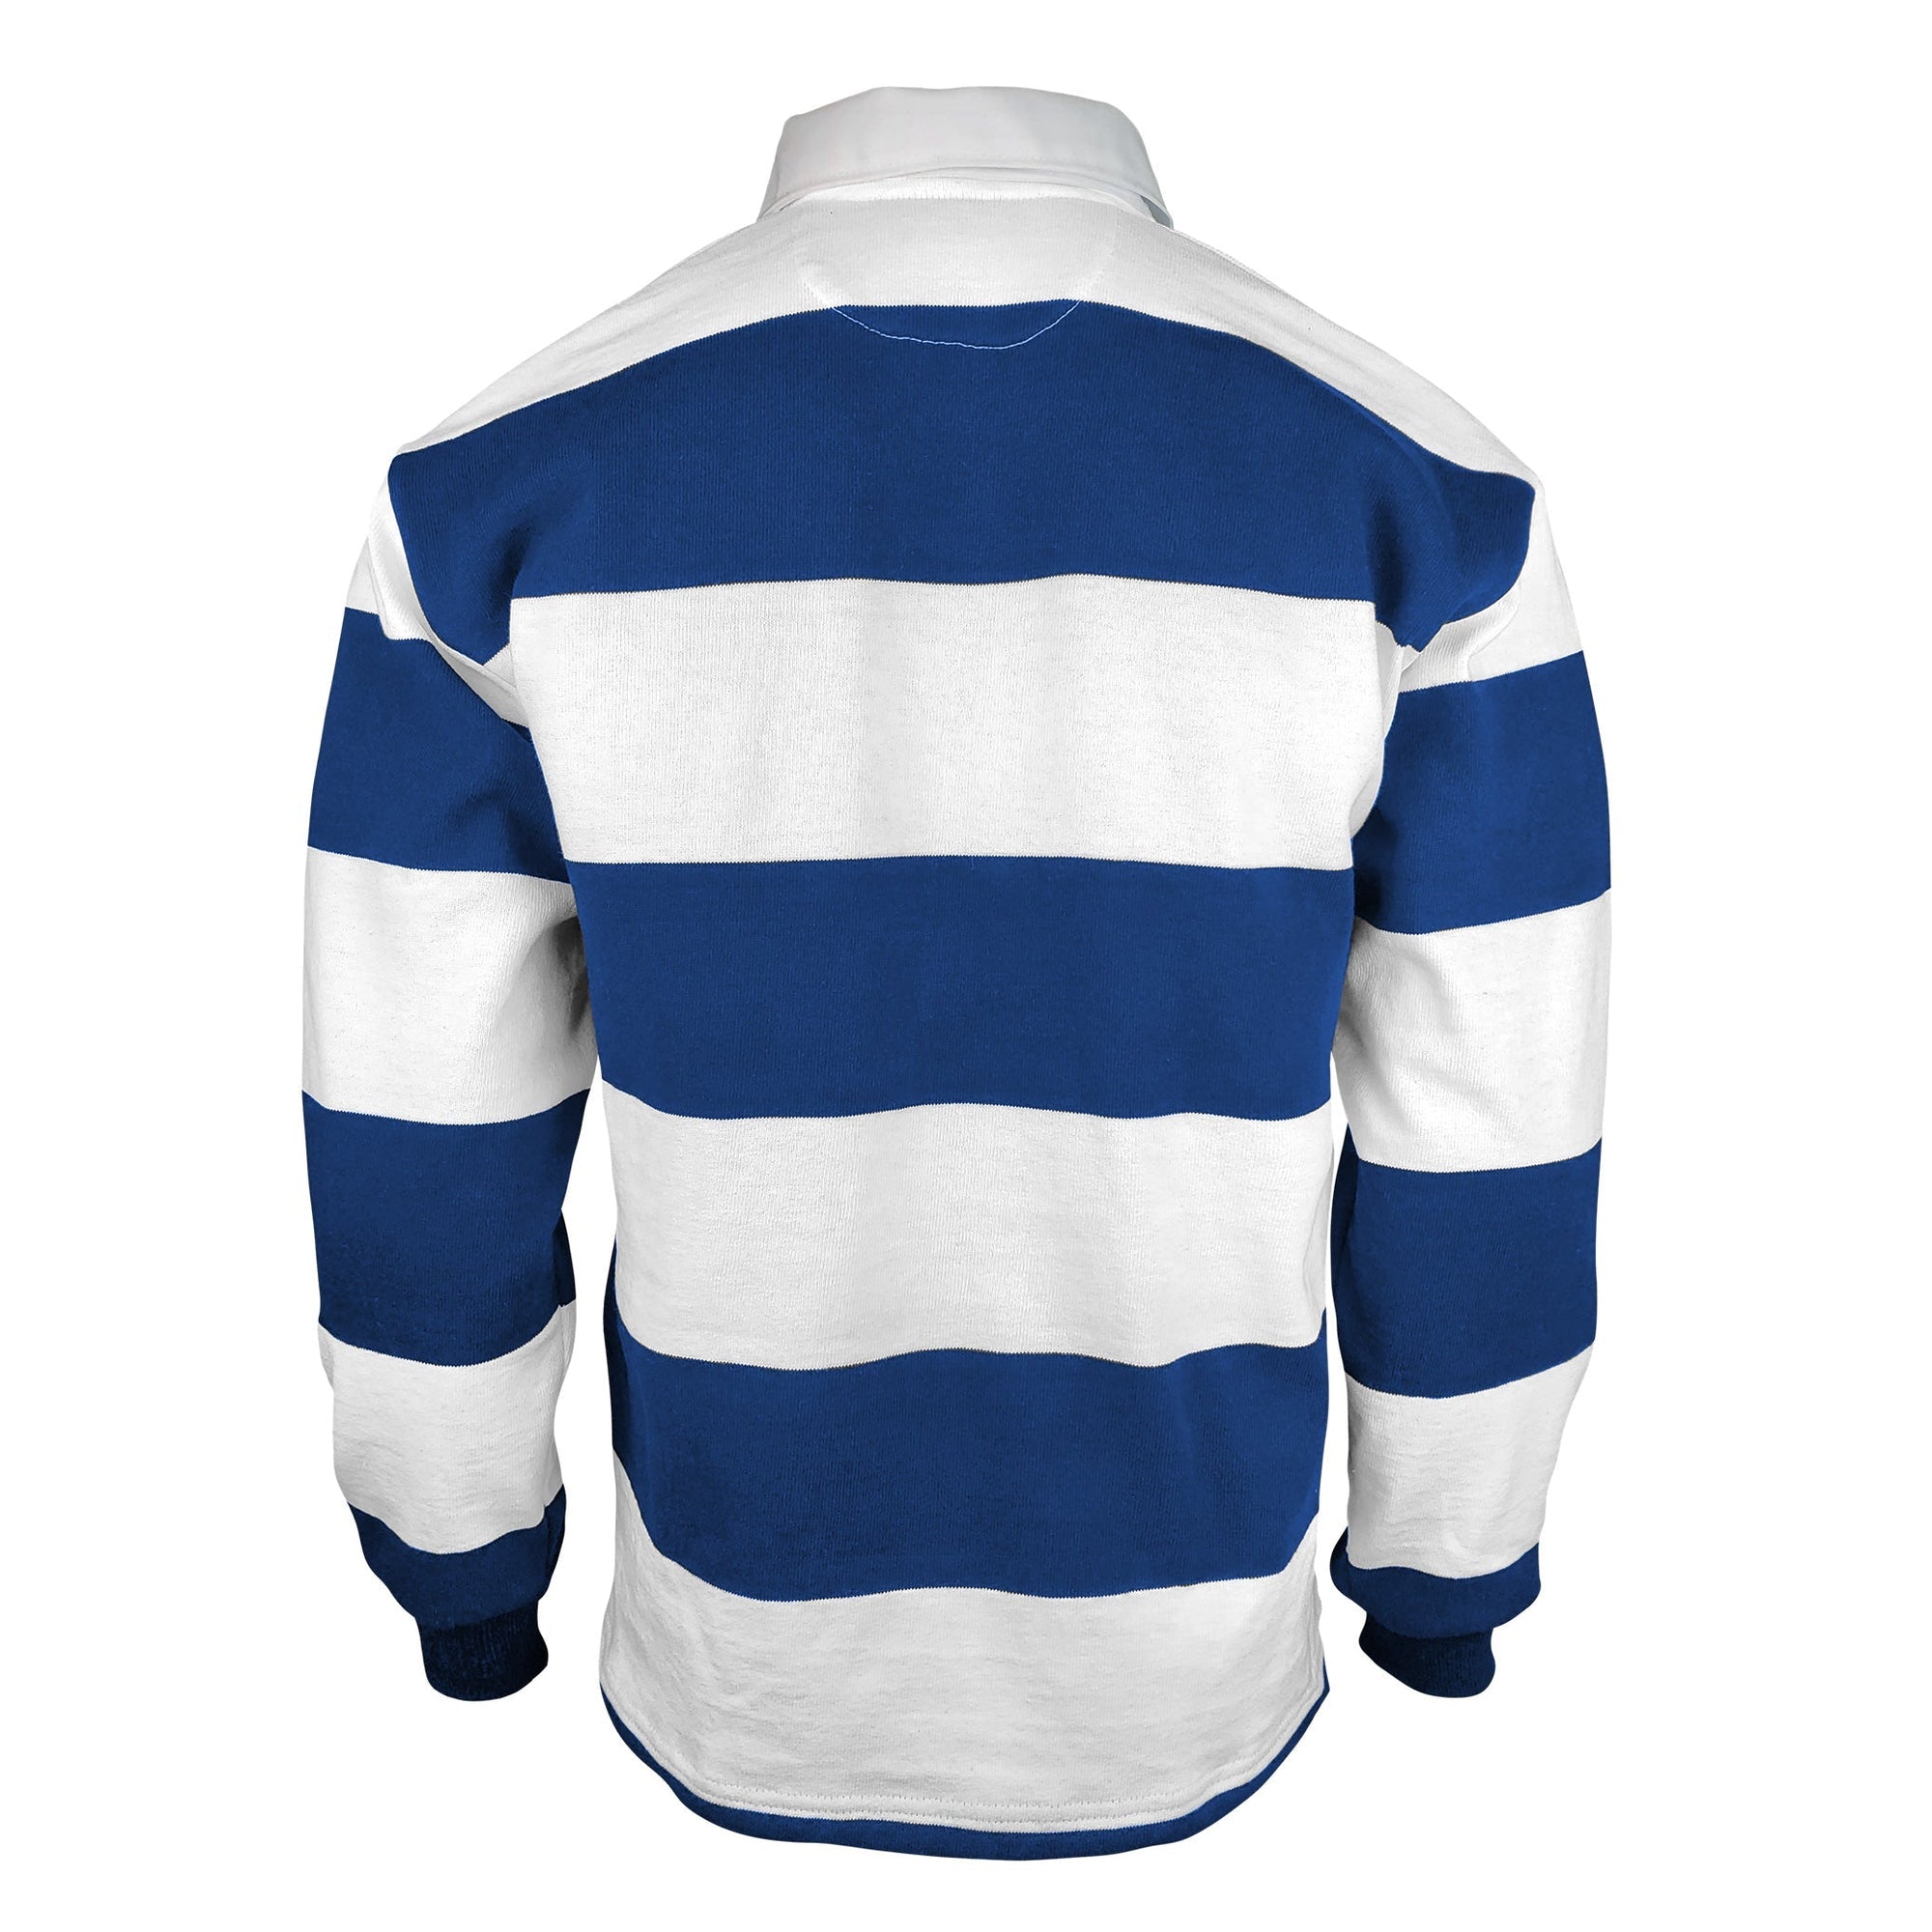 Rugby Imports UPitt RFC Casual Weight Stripe Jersey